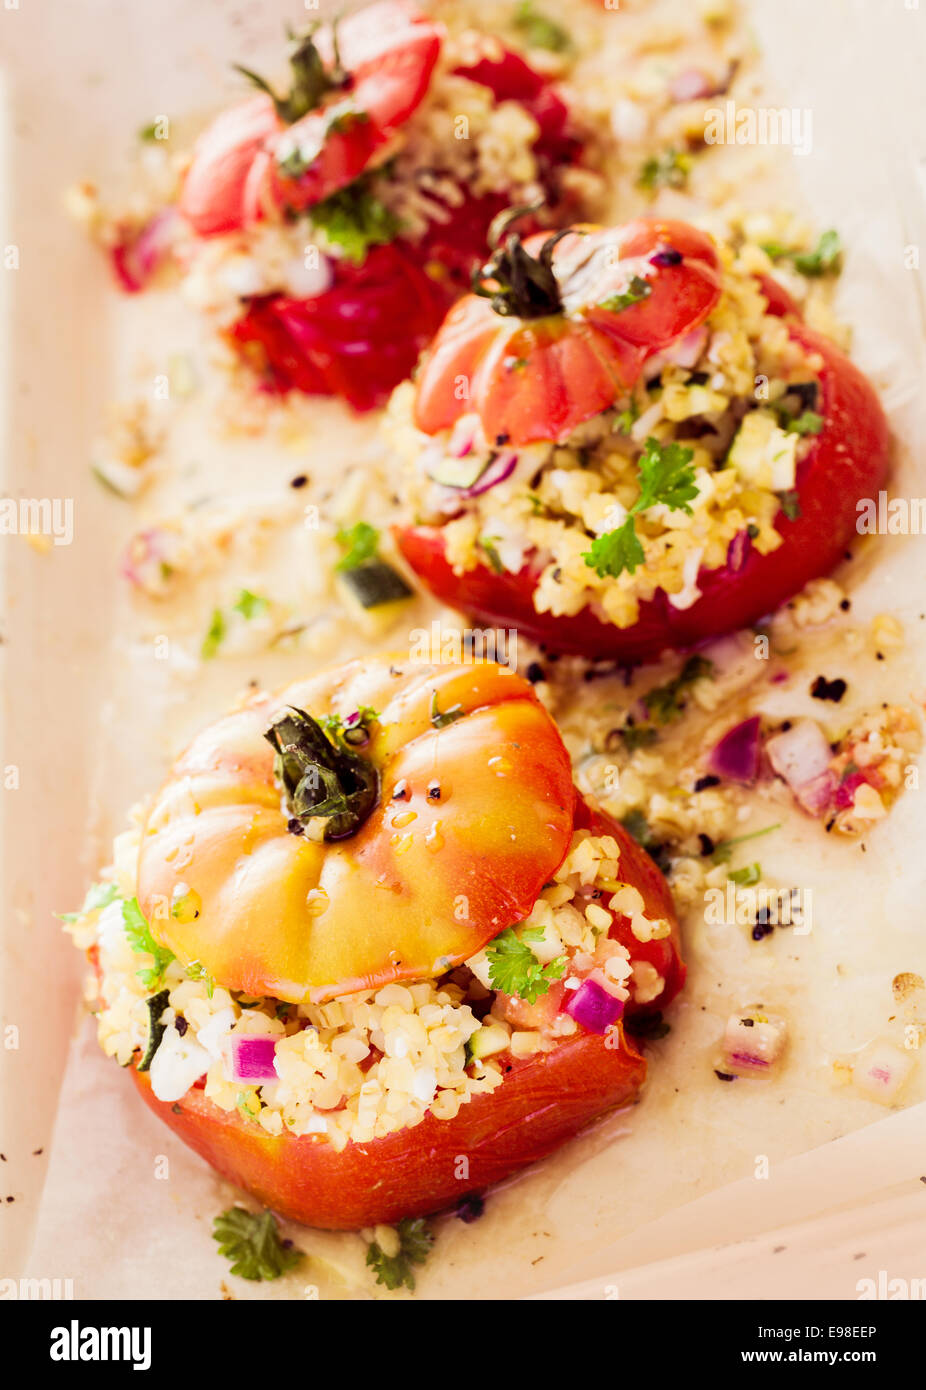 Ripe red baked tomato with savory corn and grain filling with chopped onion and herbs , high angle view of a row of three vegetables Stock Photo